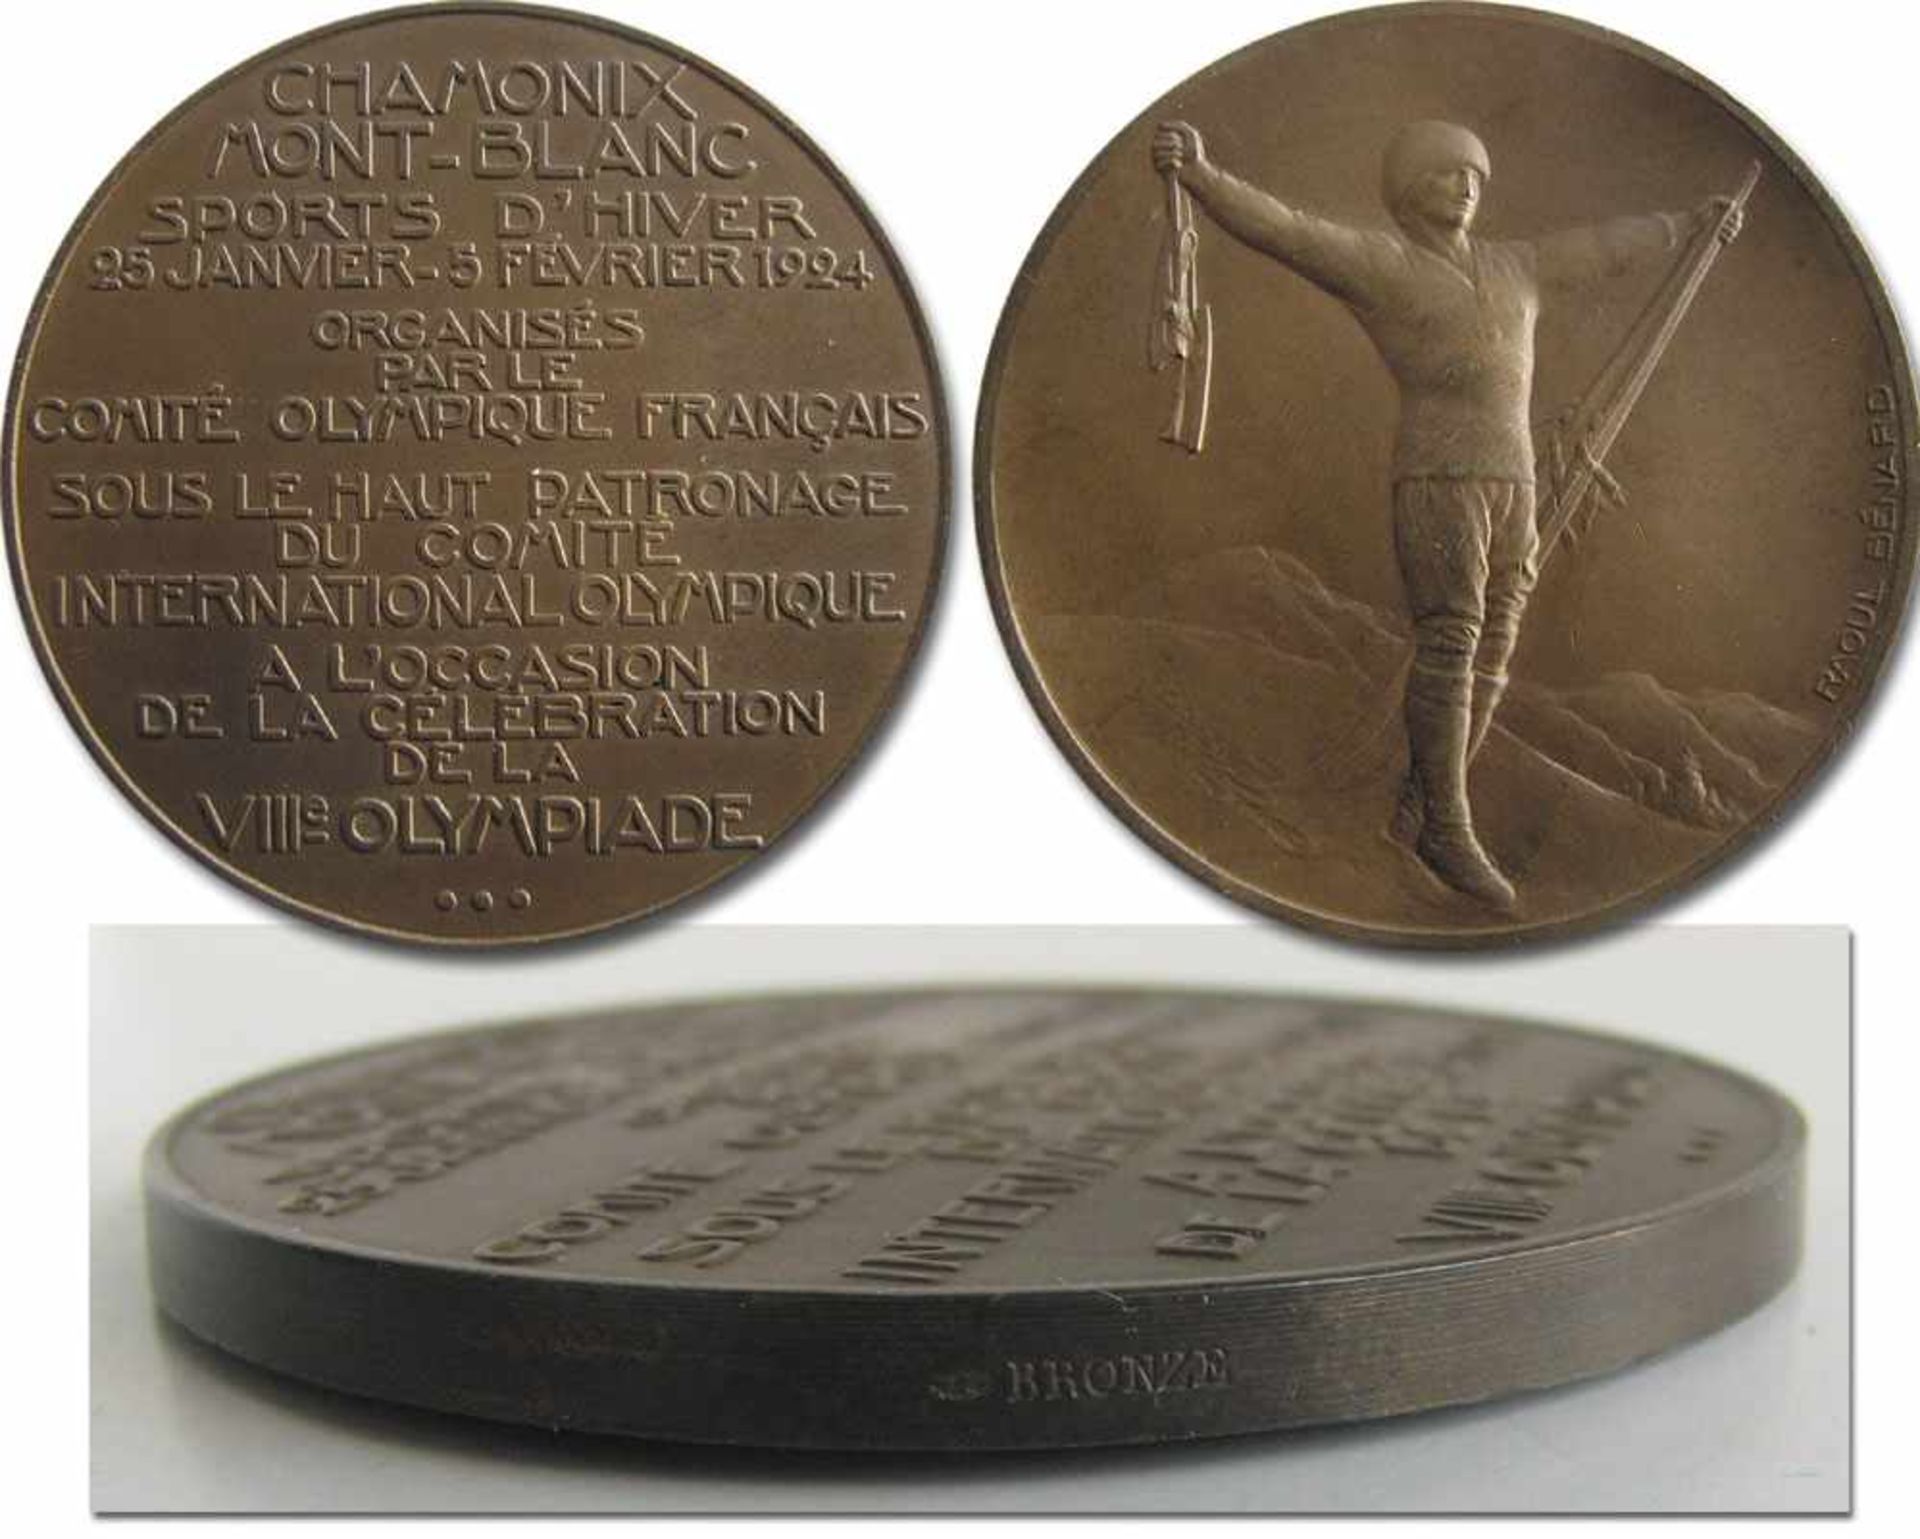 Olympic Games 1924. Participation medal Chamonix - Olympic Games 1924. Participation medal